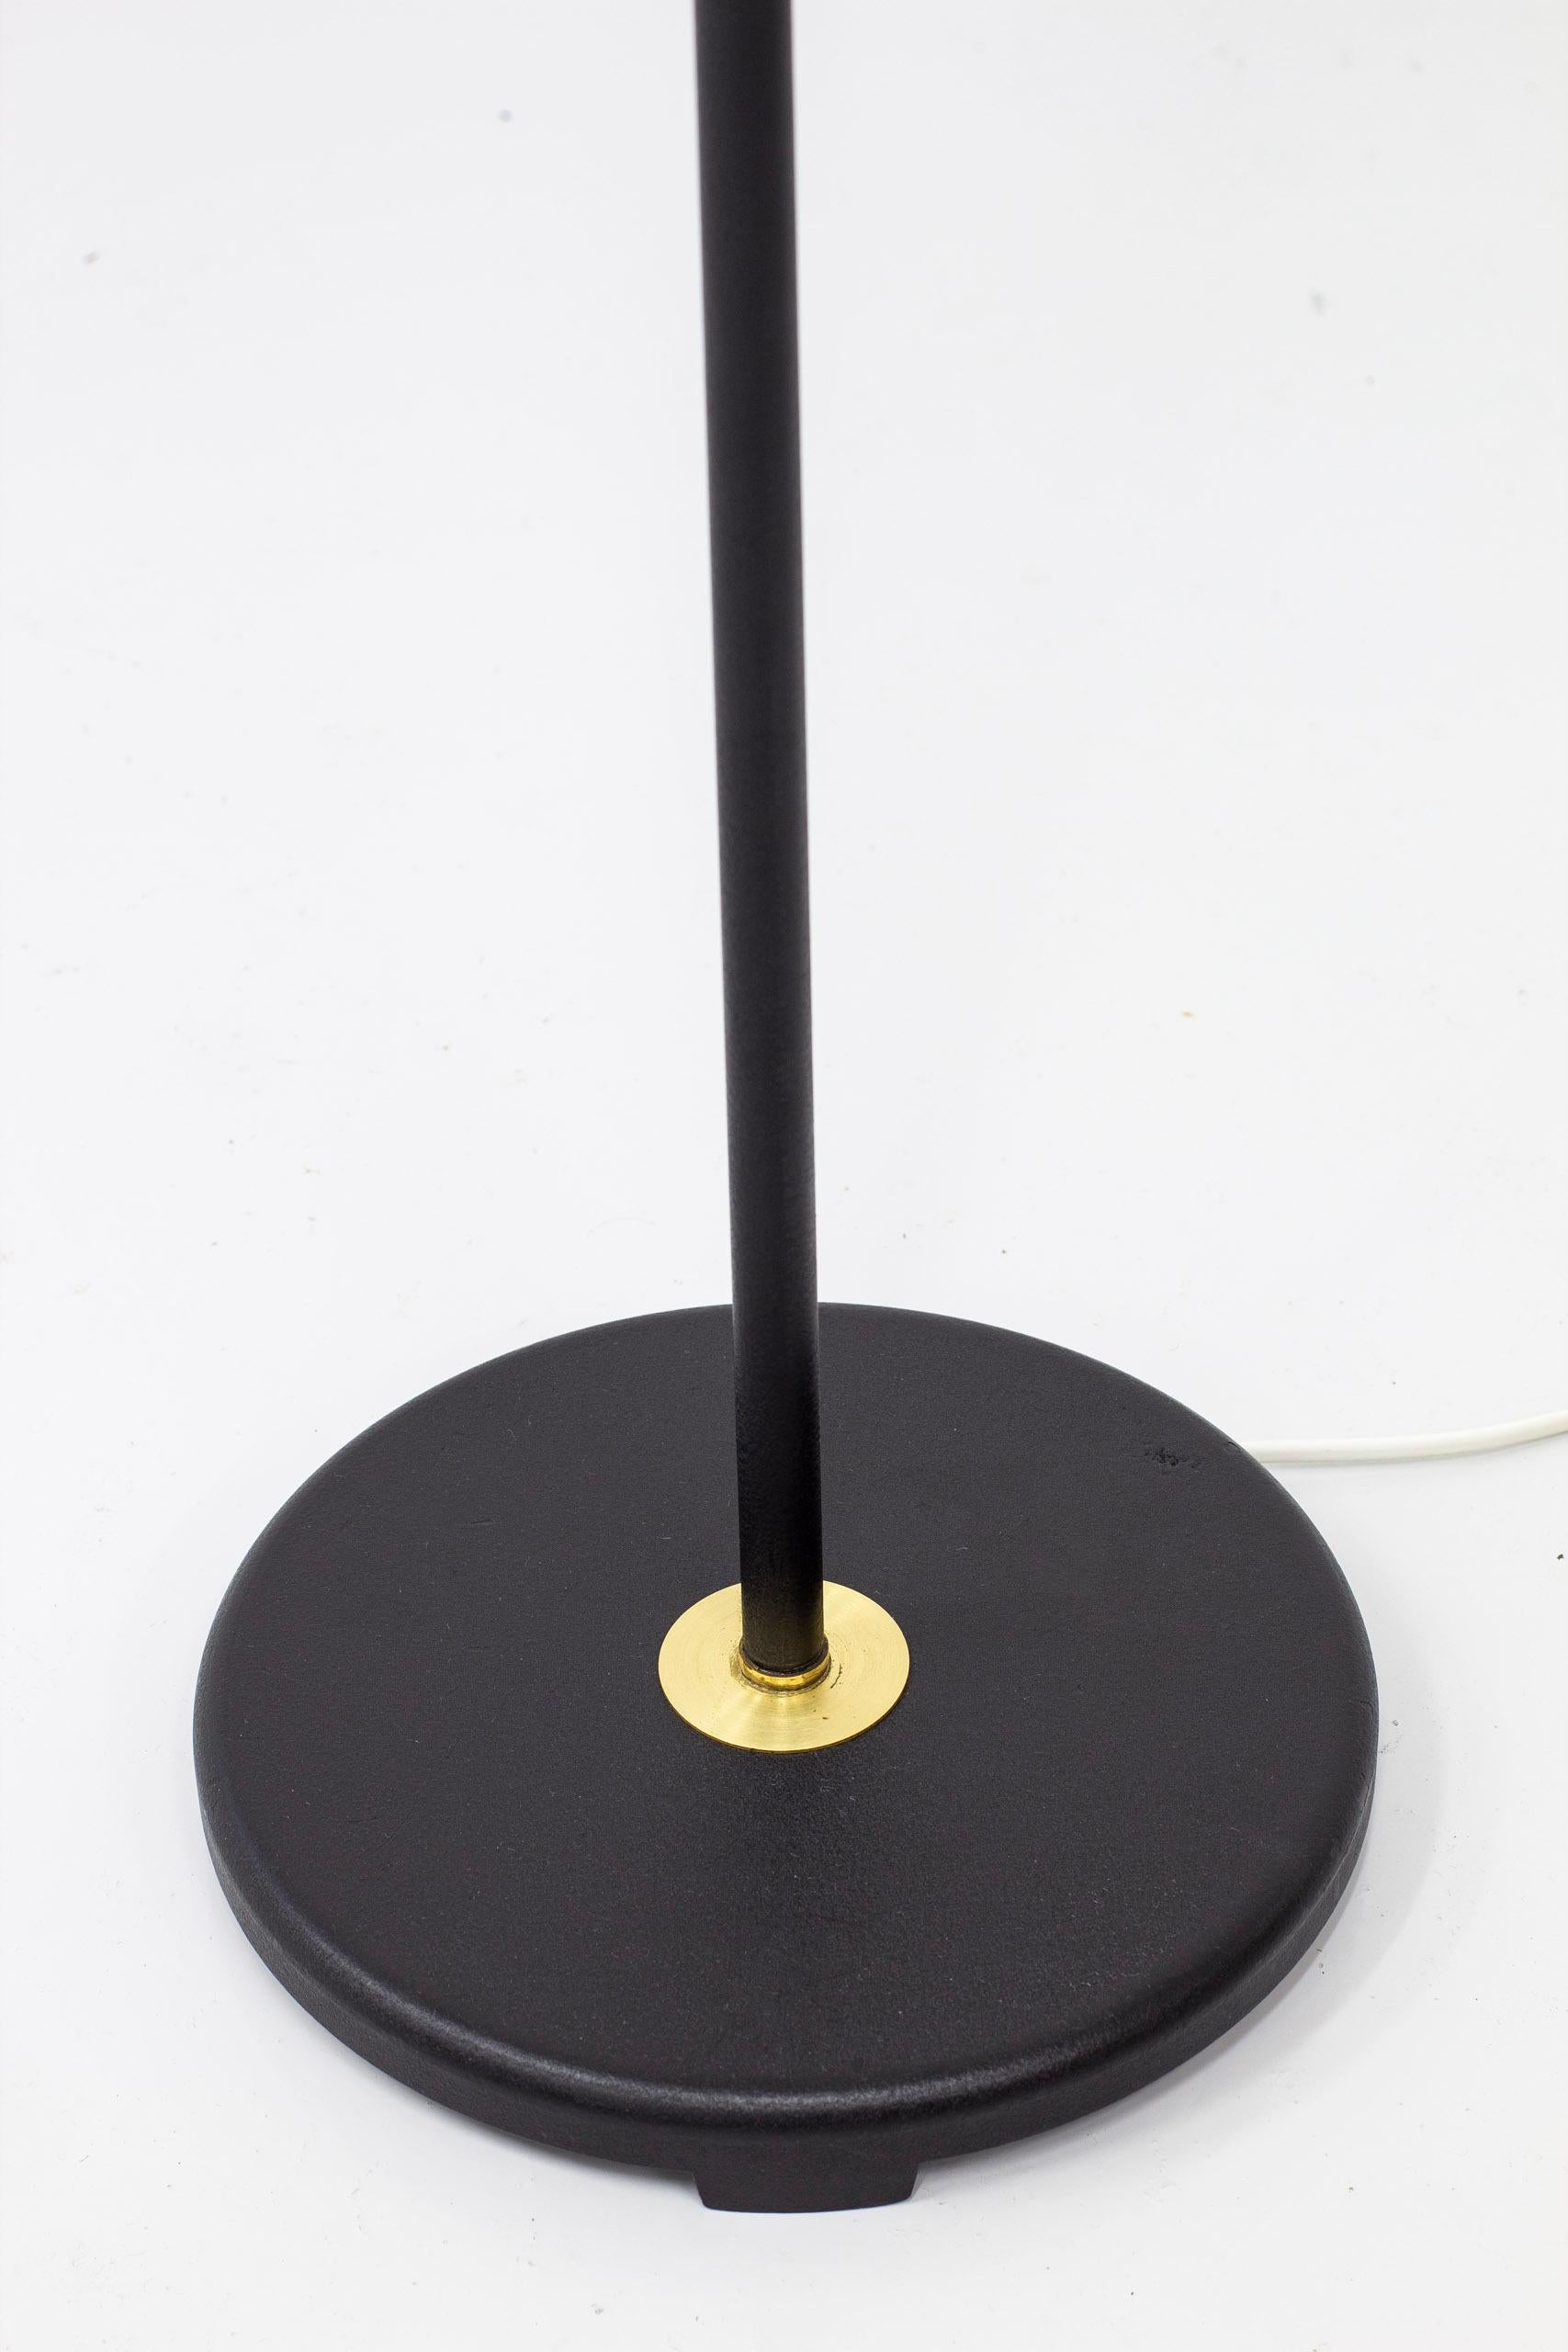 Mid-20th Century Floor Lamp in Brass and Black by Pagos, Sweden, 1950s